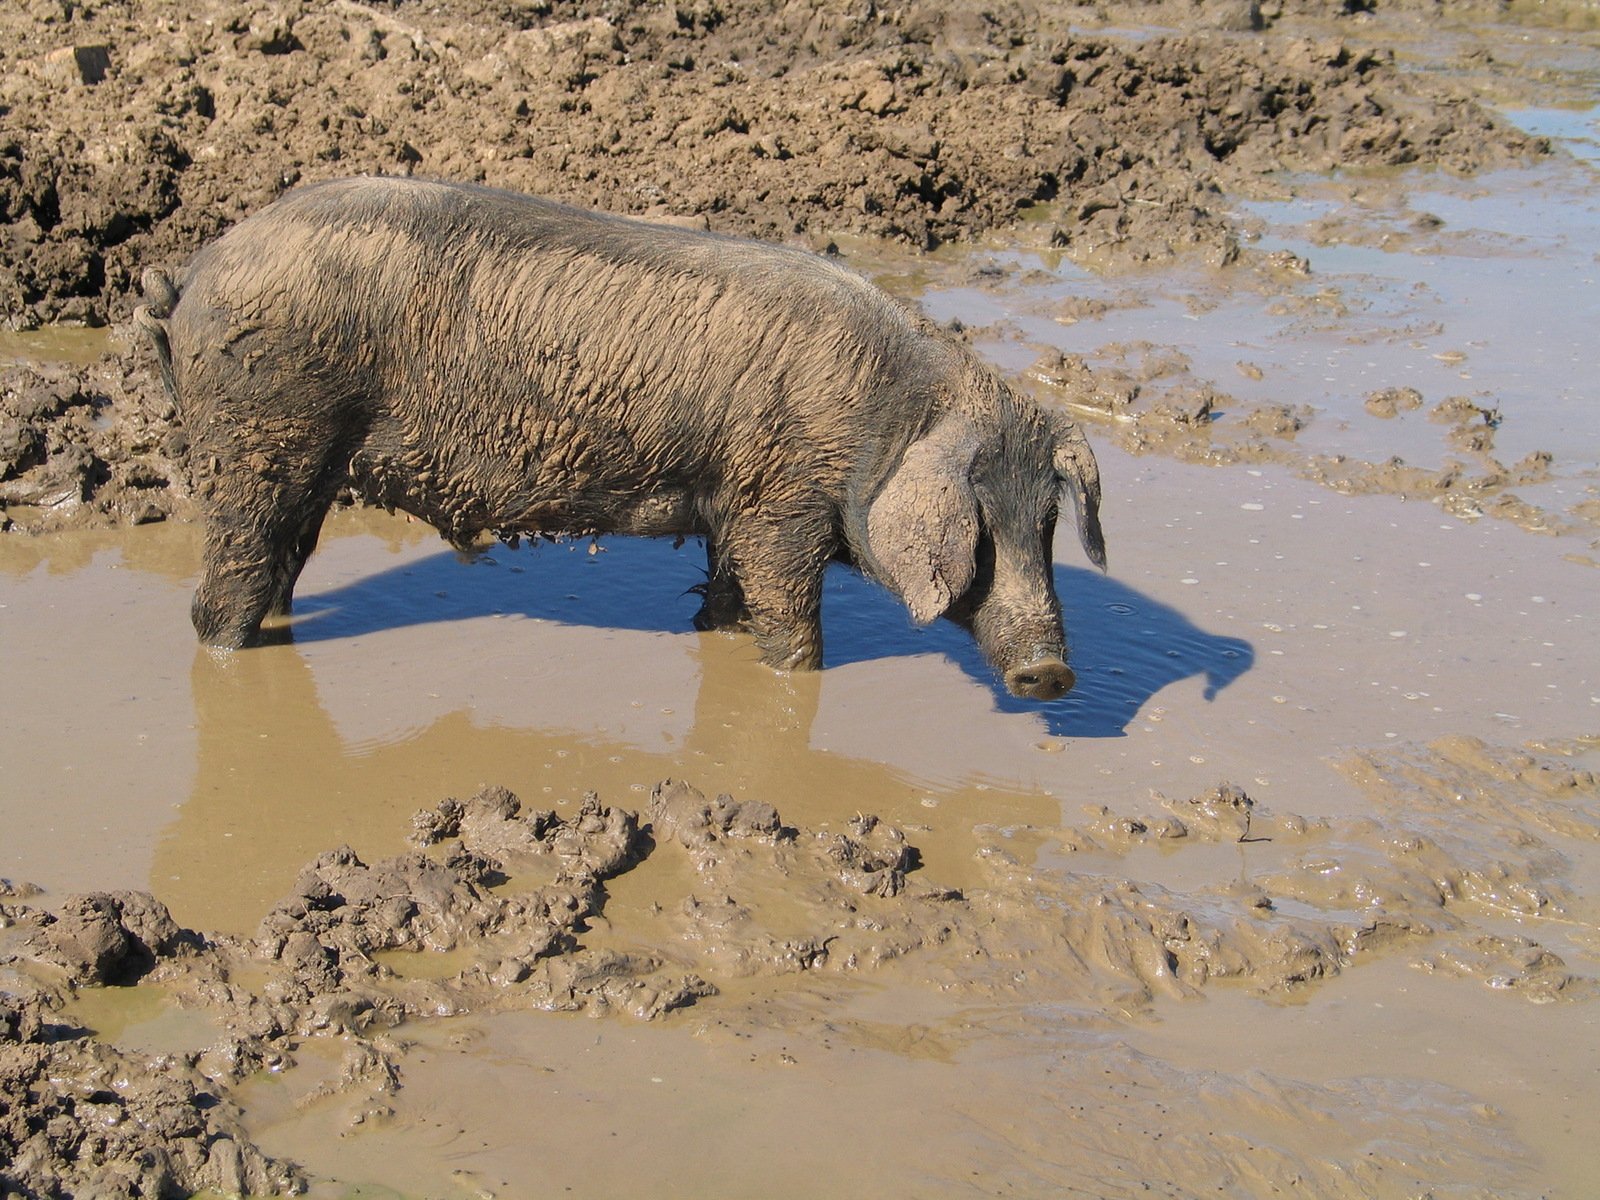 a muddy elephant in the middle of a dle